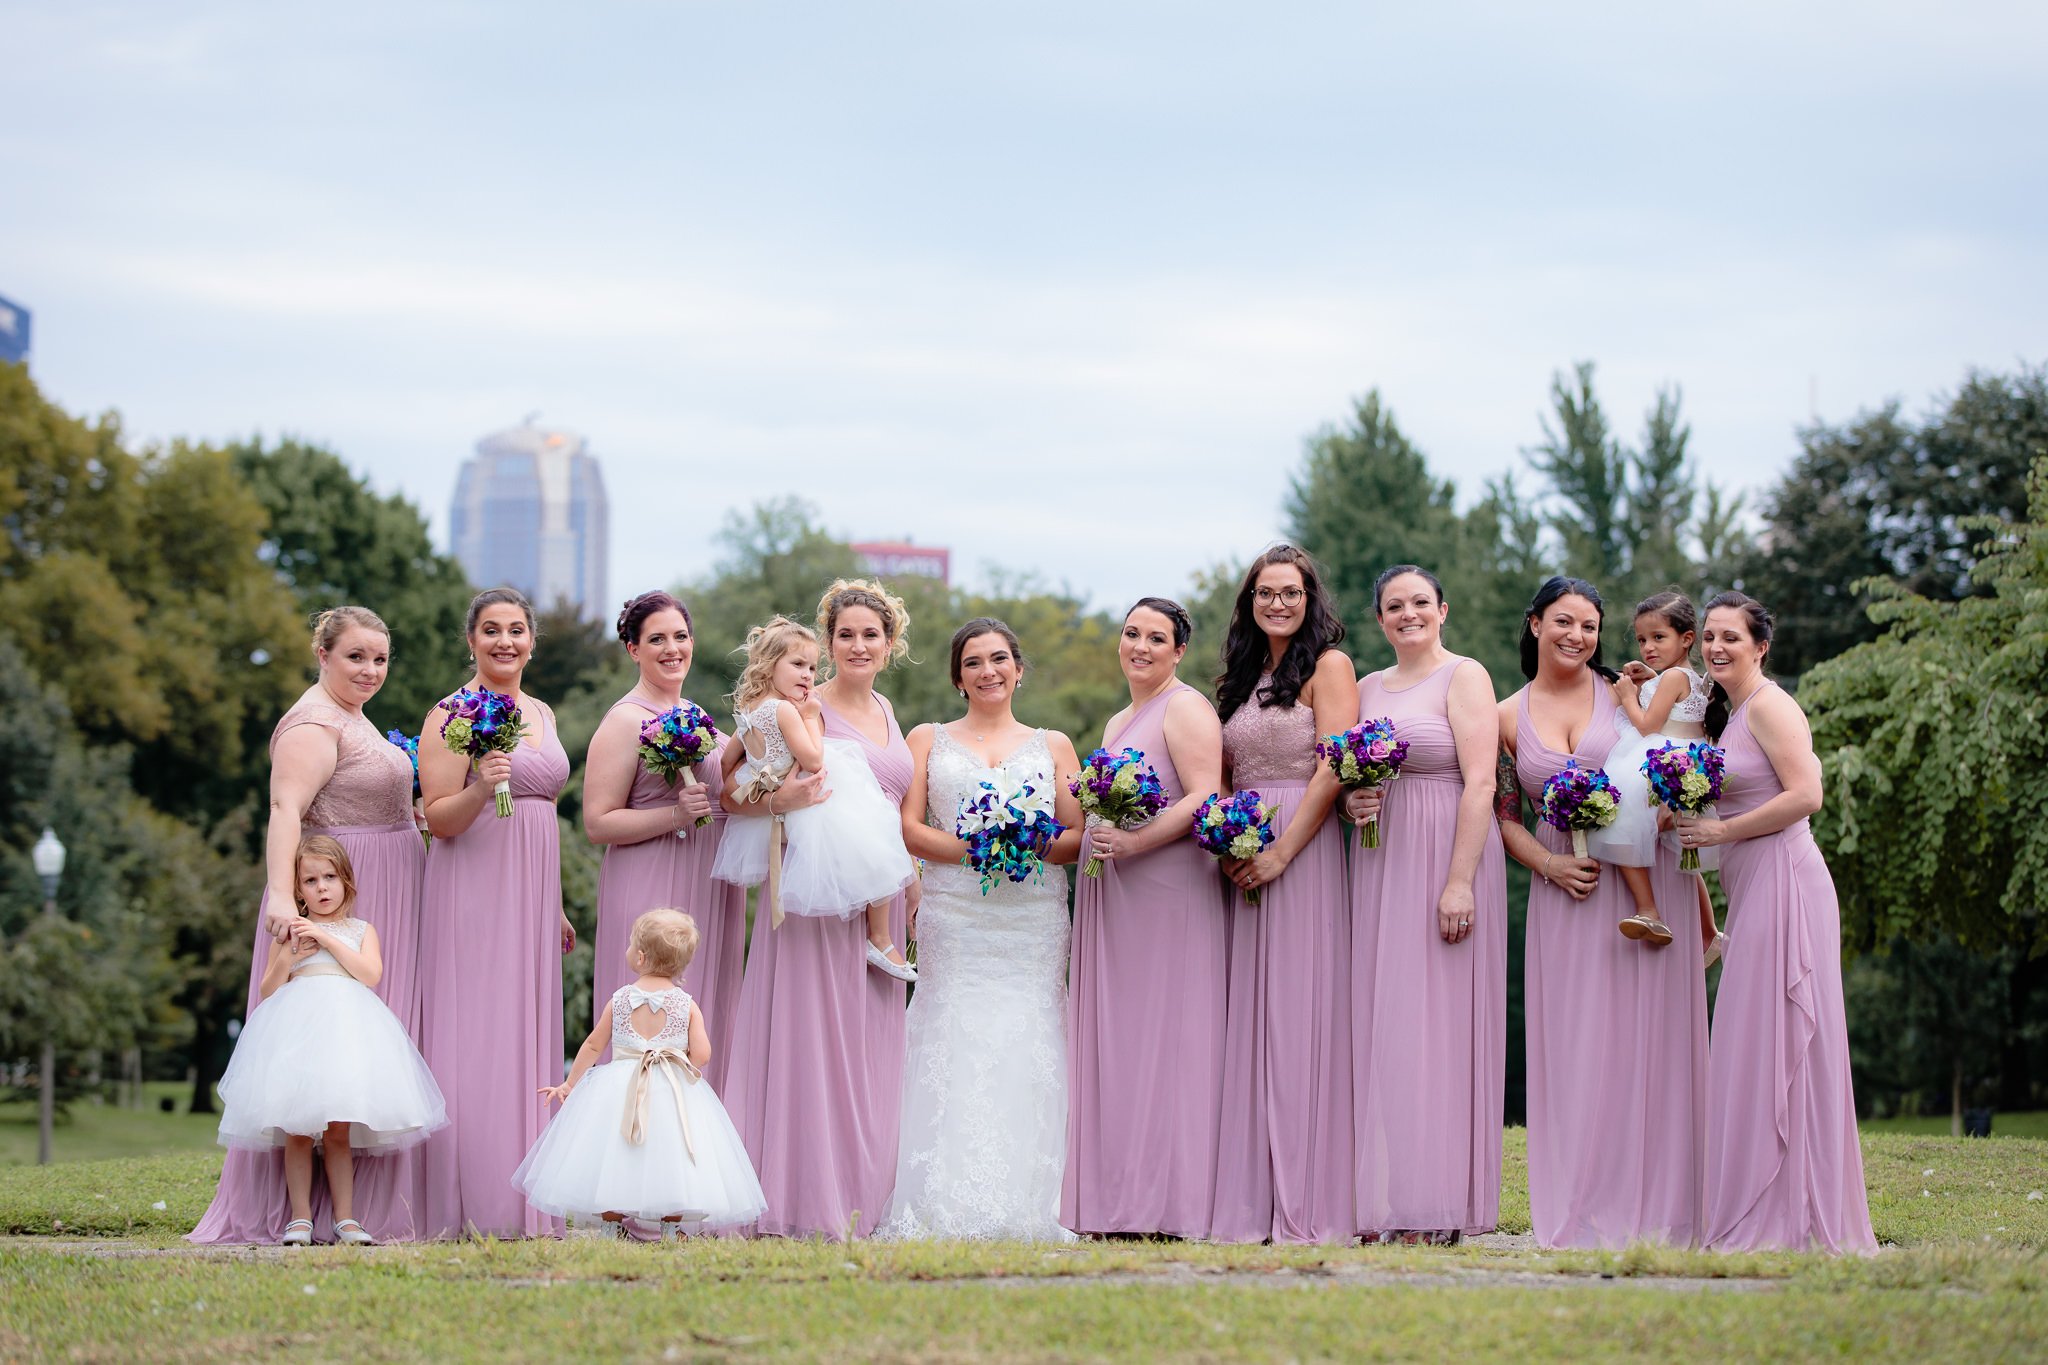 Bridesmaids pose for a photo in Allegheny Commons Park before a National Aviary wedding